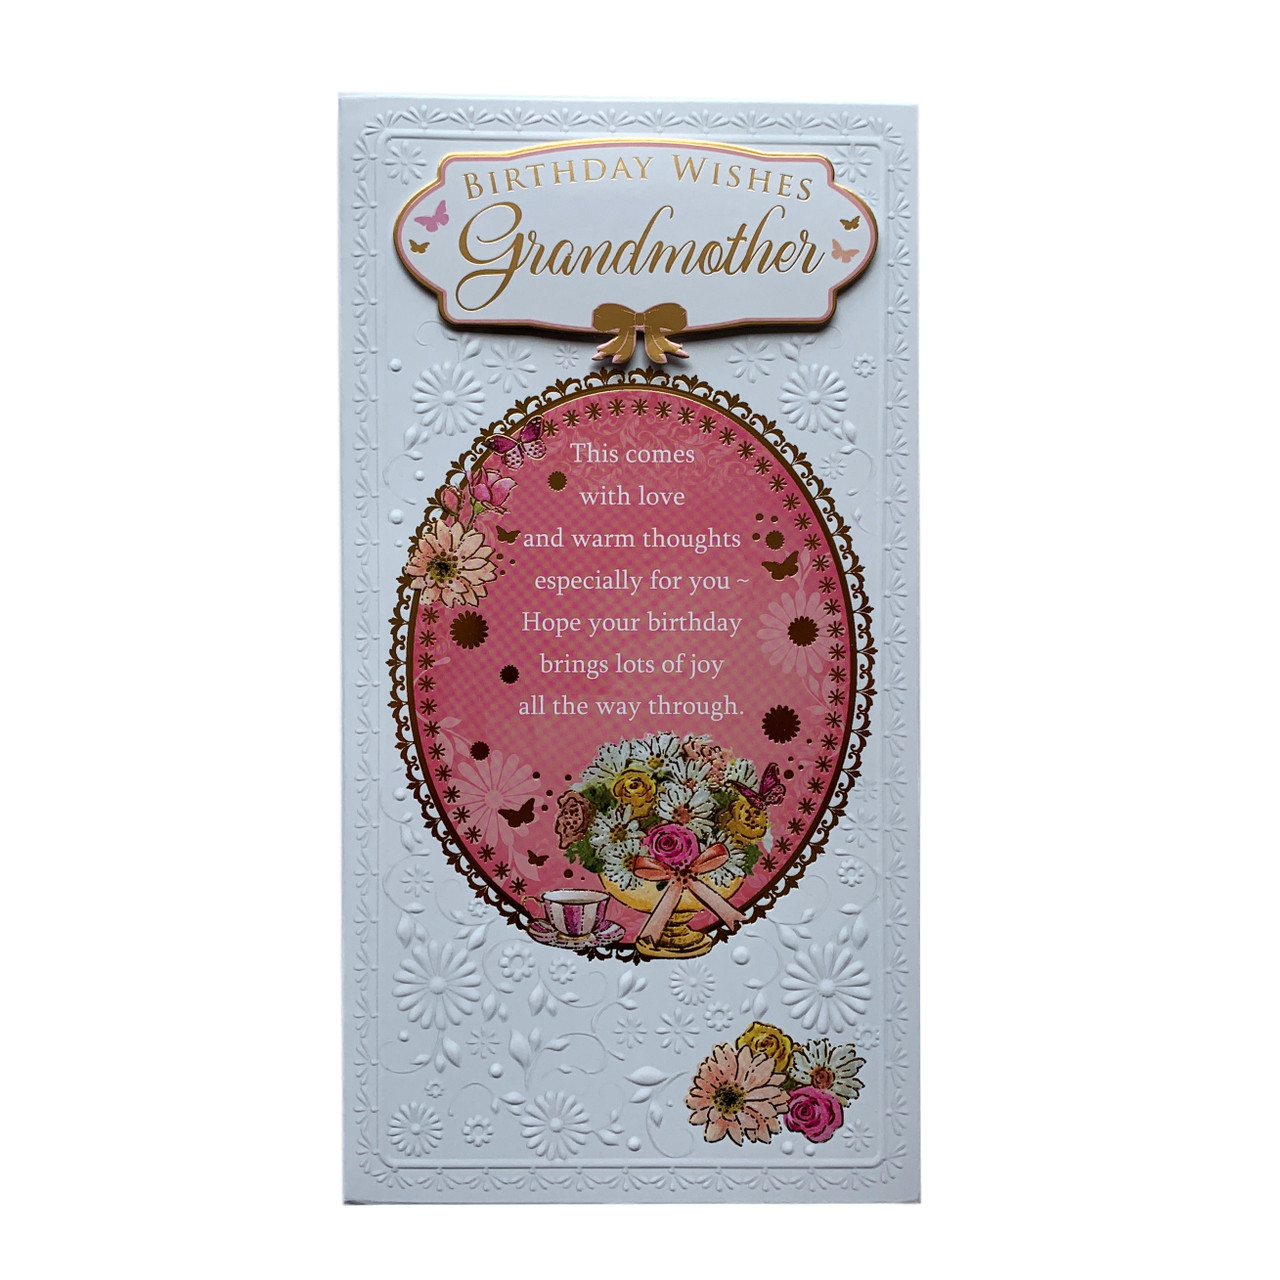 Birthday Wishes Grandmother Soft Whispers Card - Occasion Cards